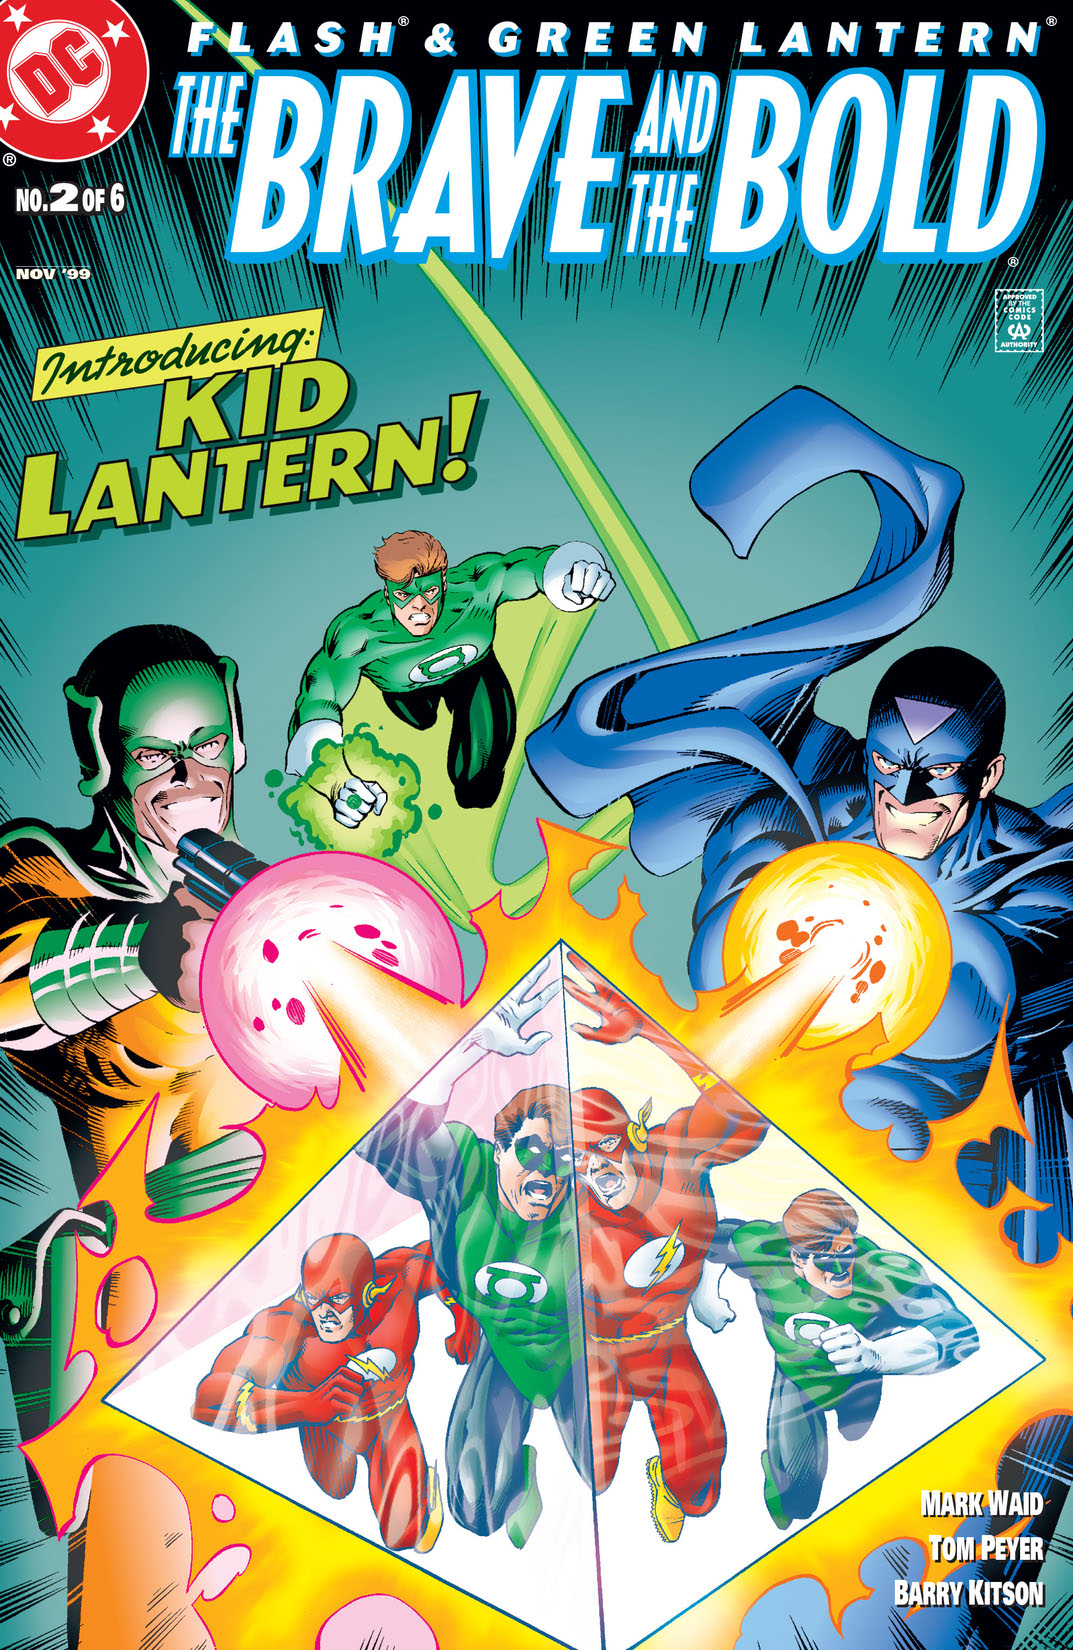 Flash & Green Lantern: The Brave & The Bold #2 preview images